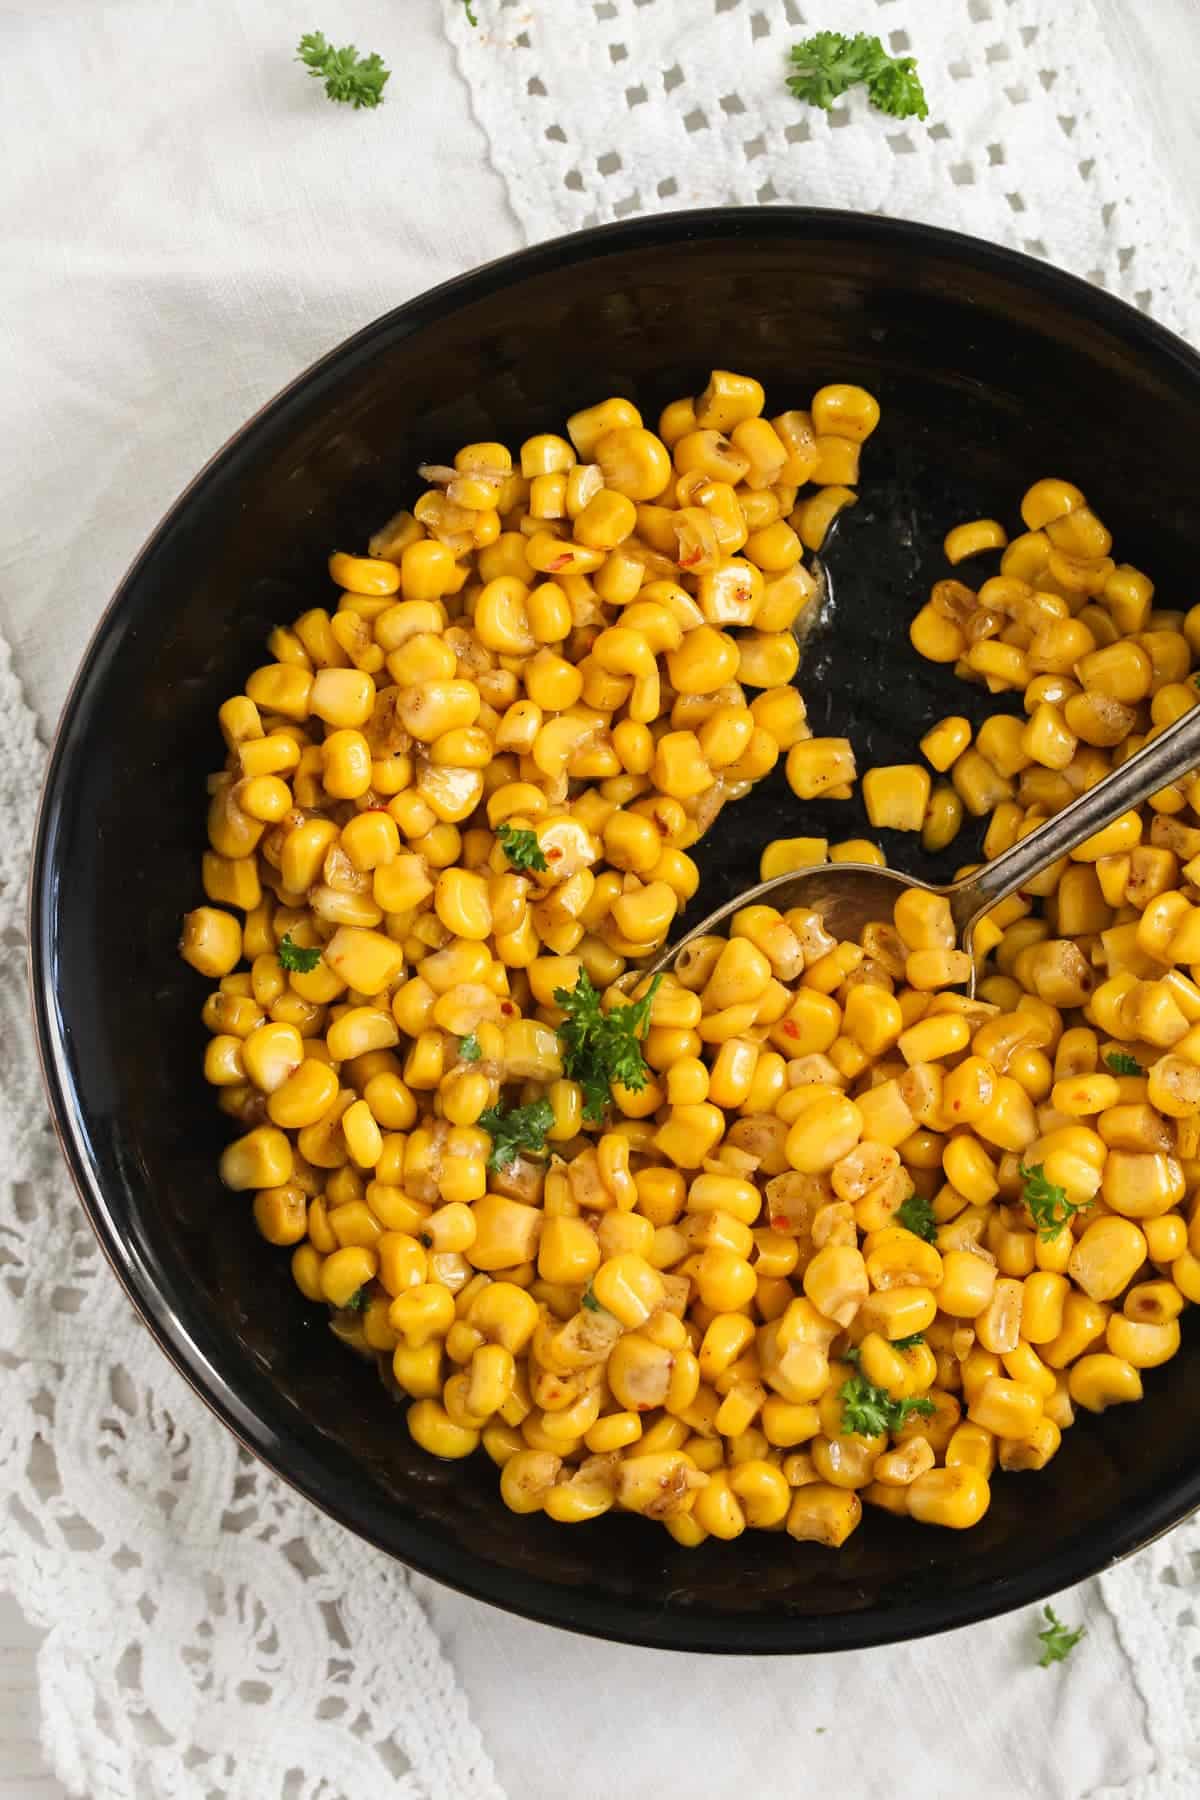 cooked frozen corn kernels in a black bowl.